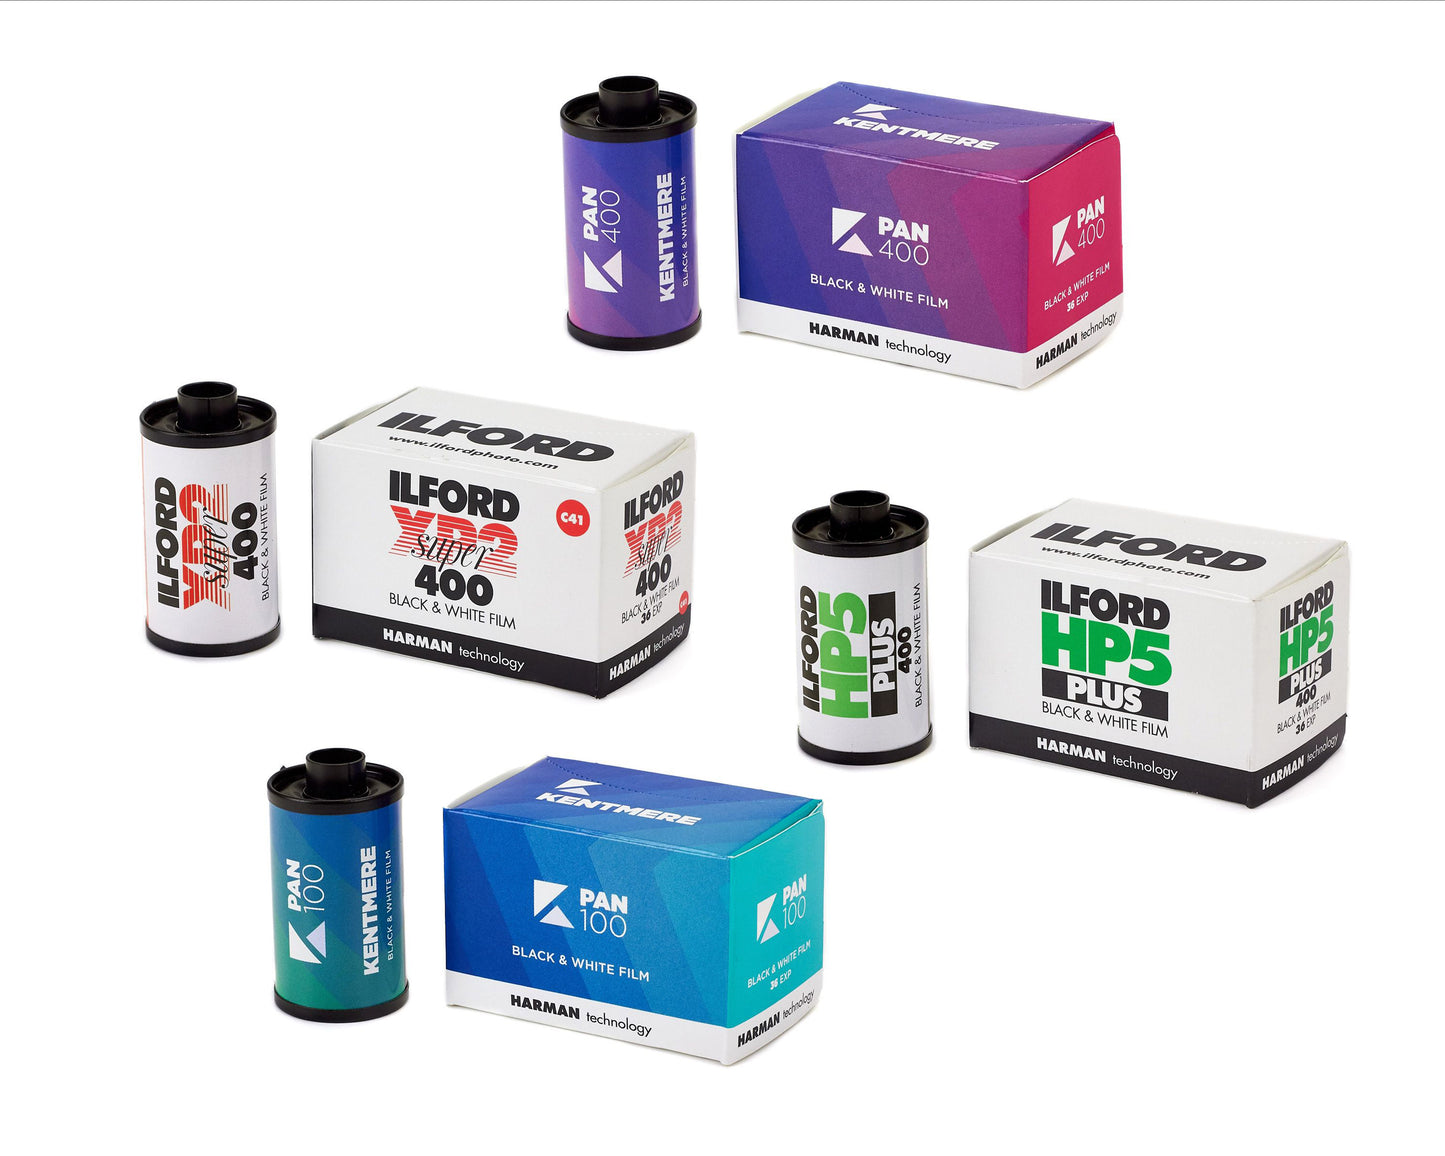 Ilford and Kentmere 35mm film sampler (four 36-exposure rolls)